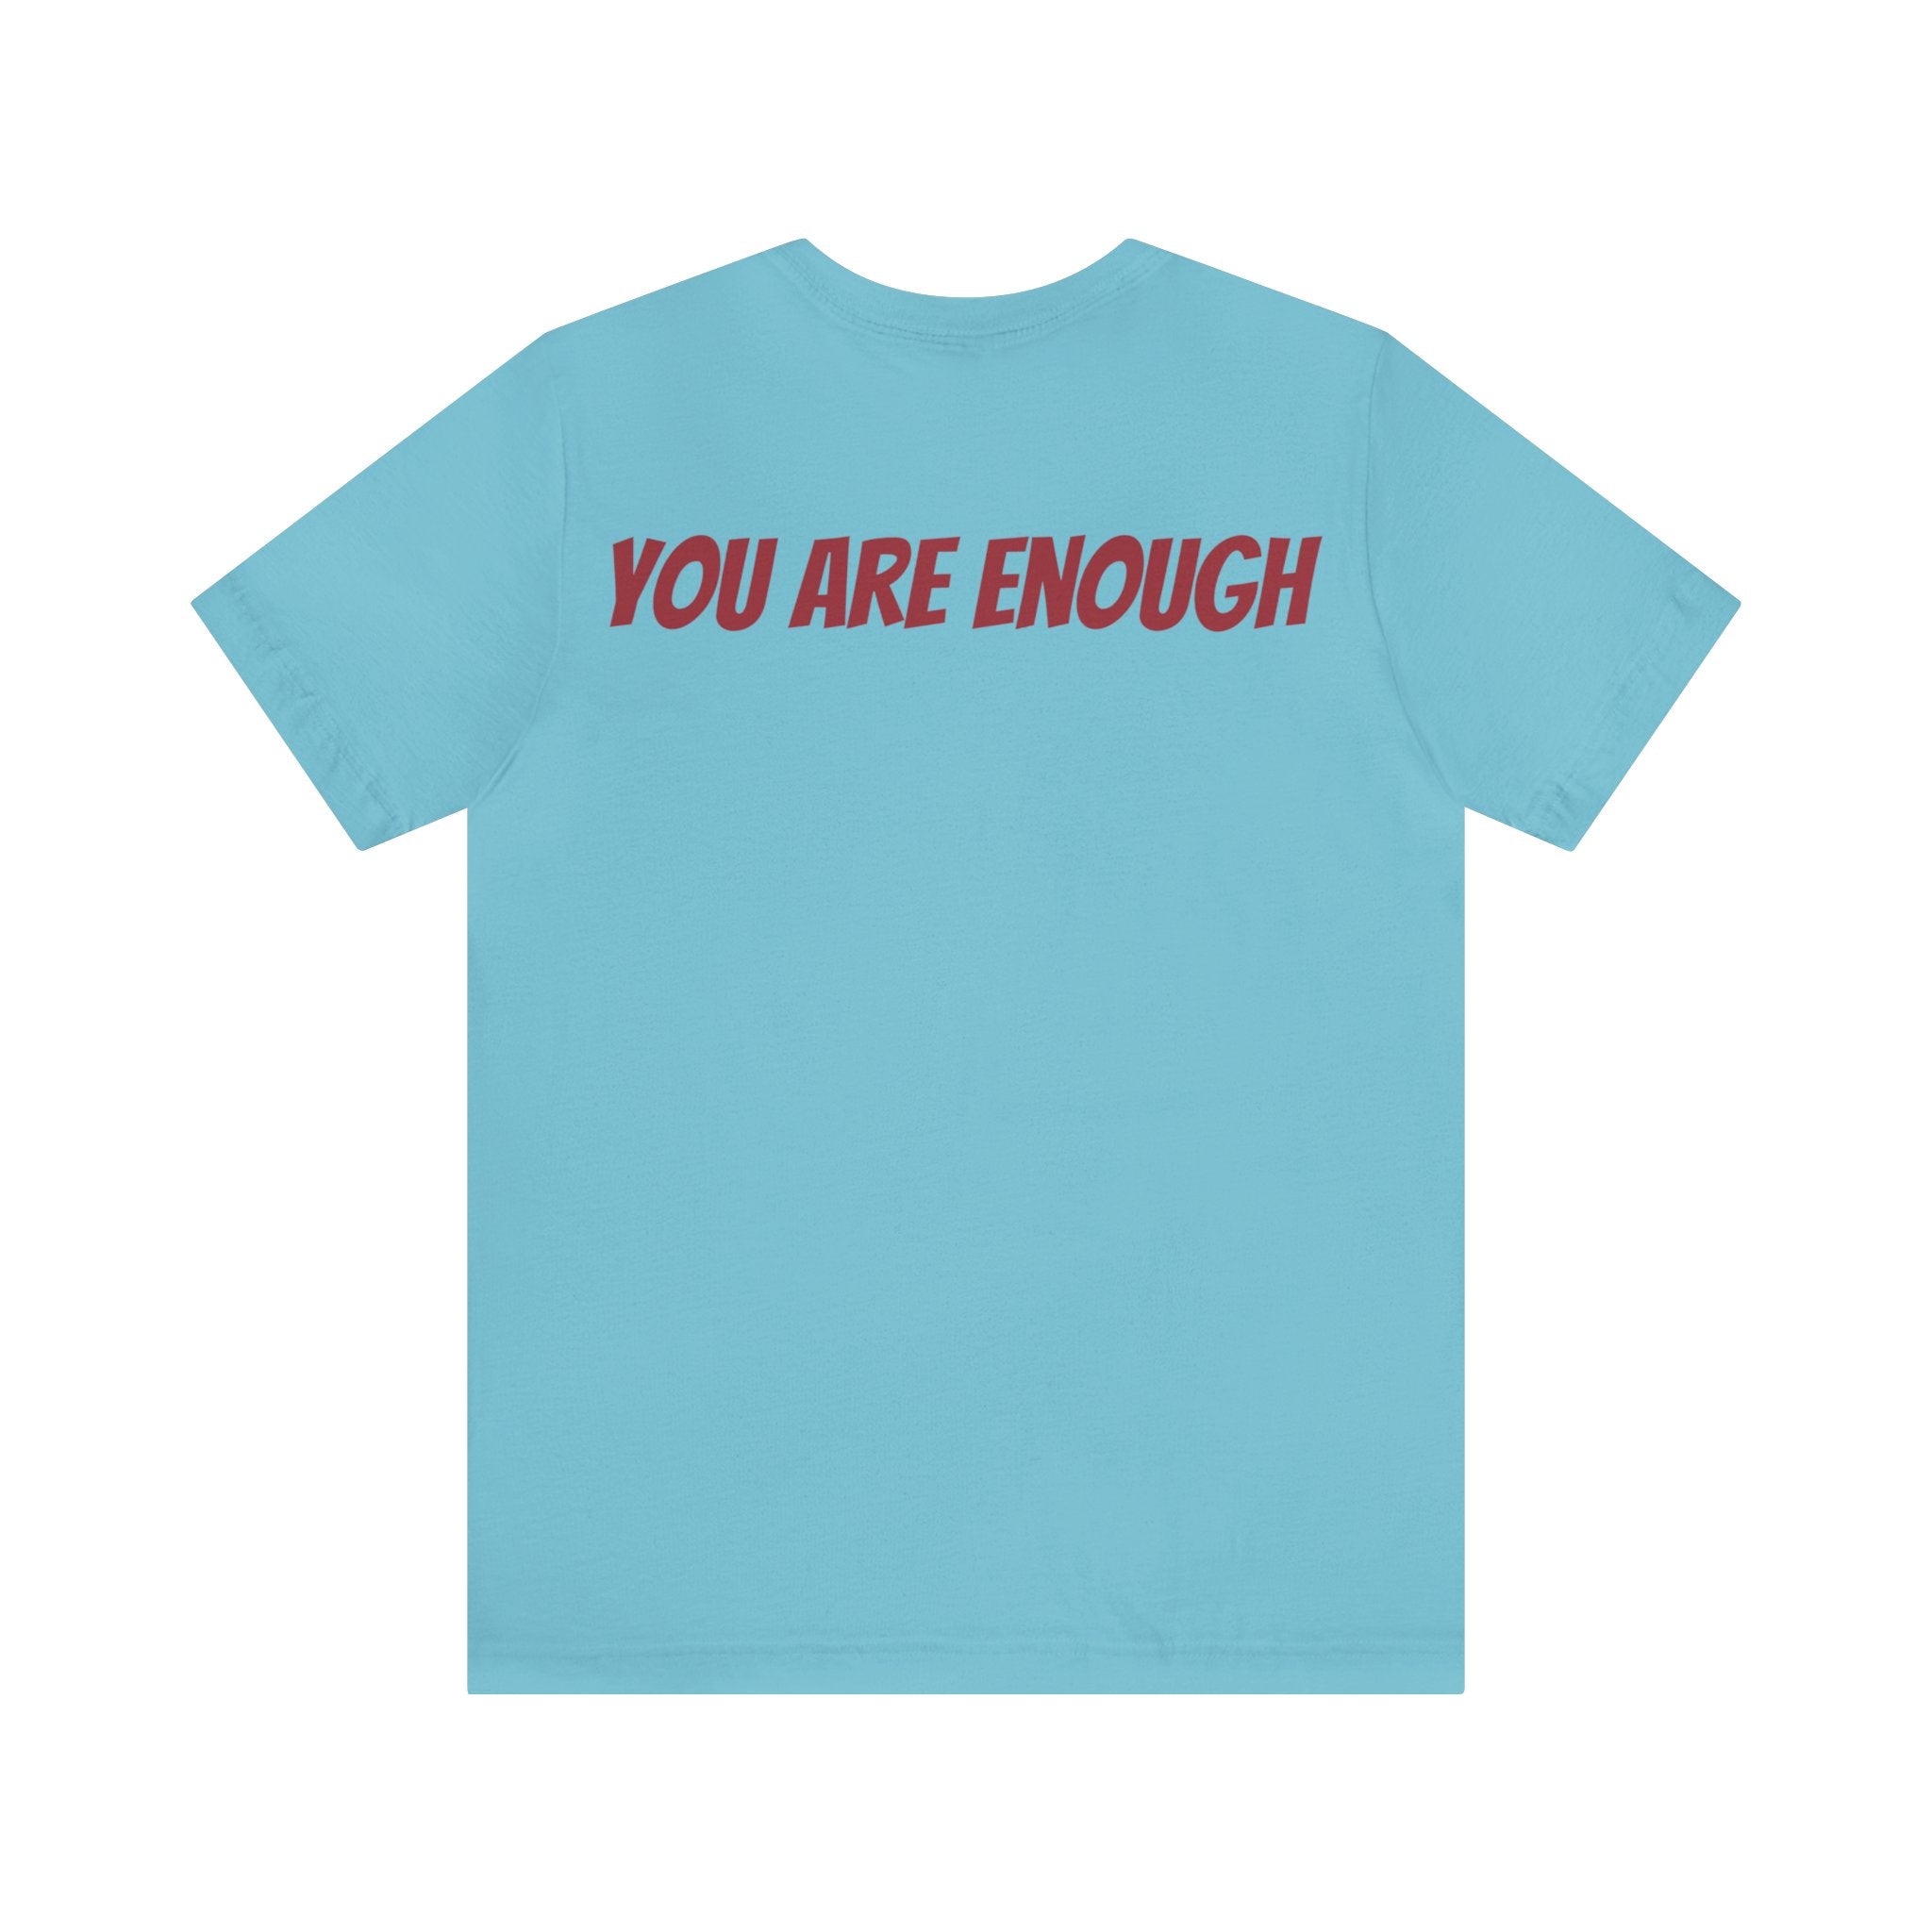 You Are Enough Short Sleeve Tee Bella+Canvas 3001 Heather Mauve Airlume Cotton Bella+Canvas 3001 Crew Neckline Jersey Short Sleeve Lightweight Fabric Mental Health Support Retail Fit Tear-away Label Tee Unisex Tee T-Shirt 14147723378827578469_2048 Printify